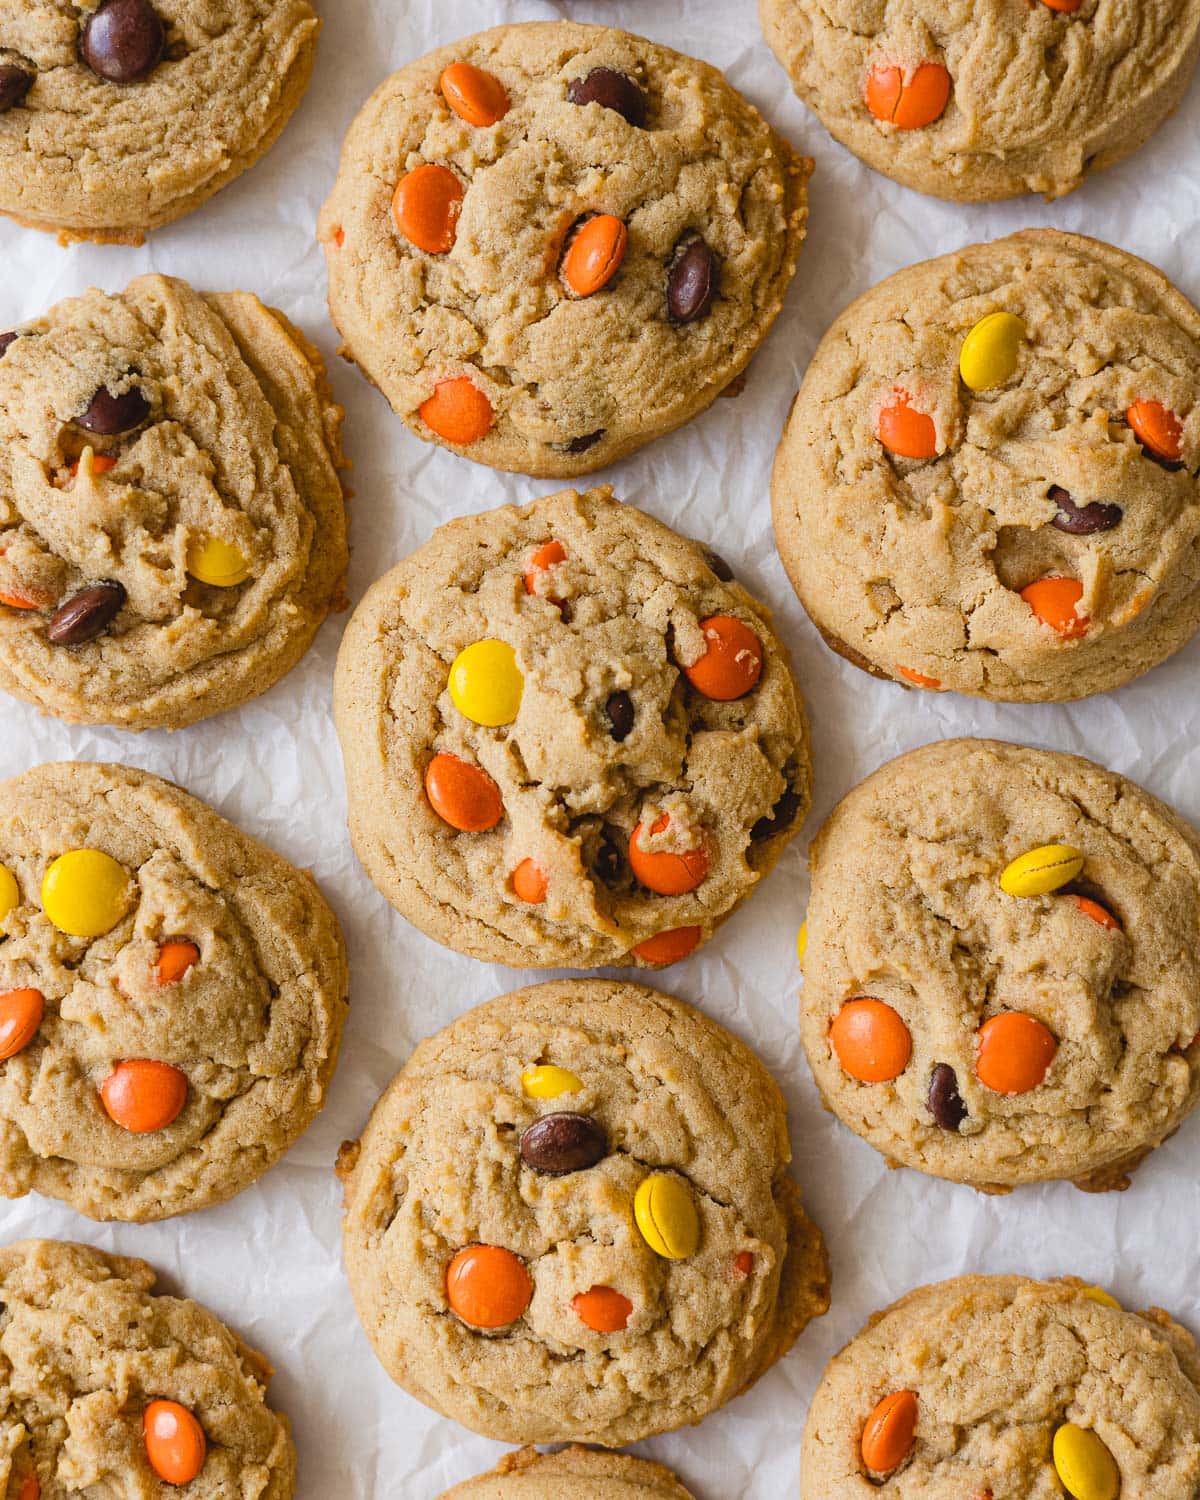 Crumbl Reese’s Pieces Cookies